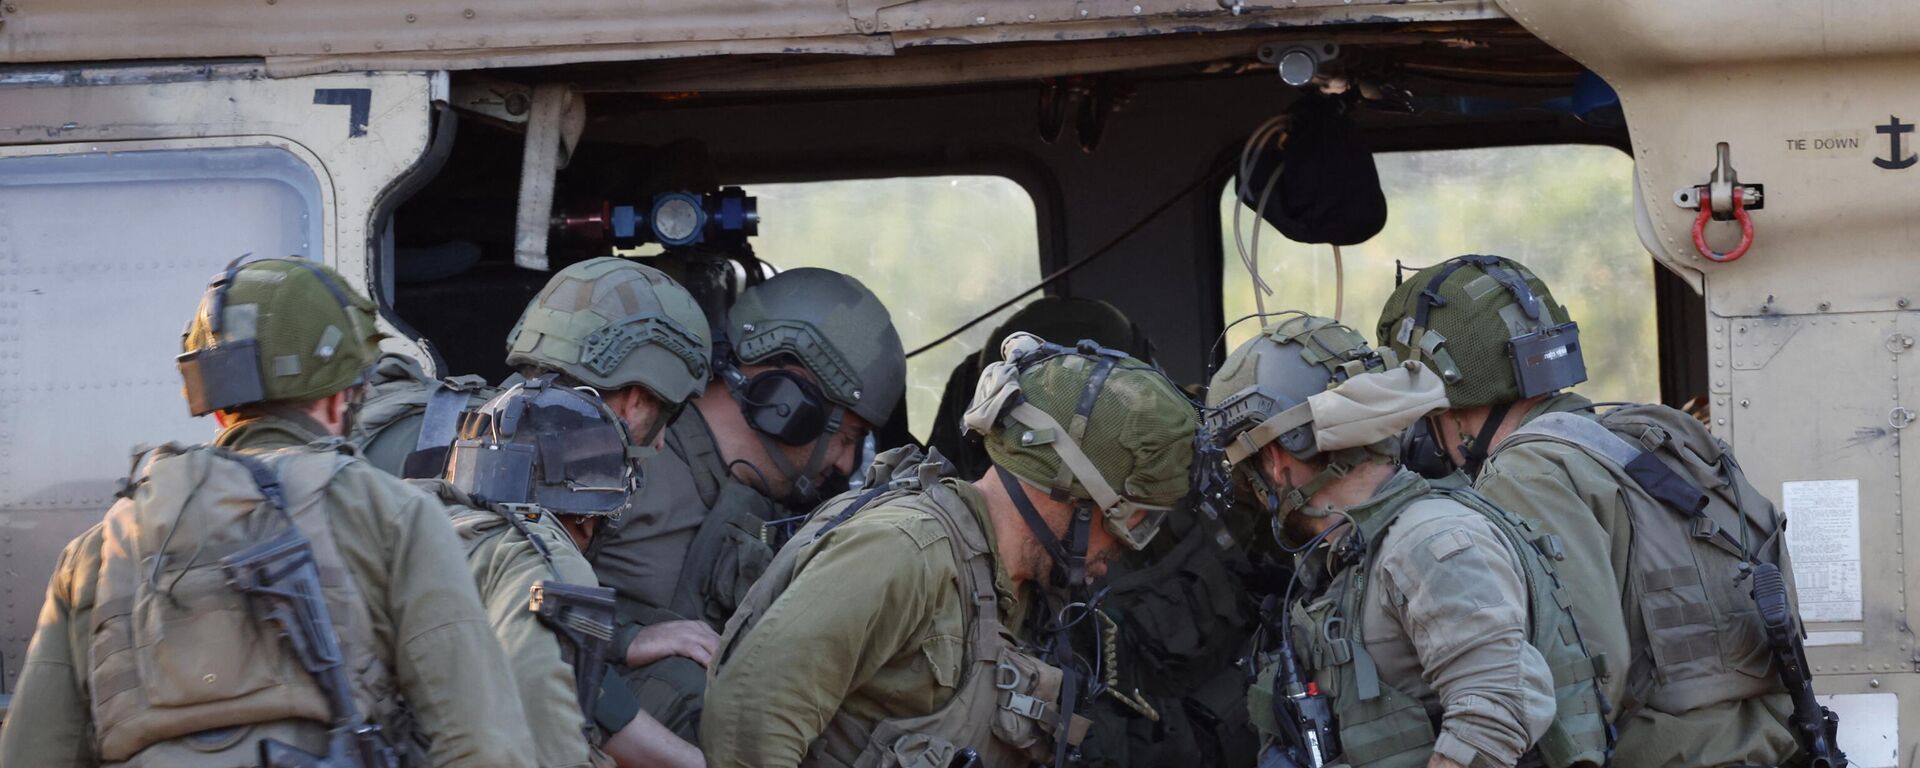 Israeli soldiers take part in a rescue exercise in Upper Galilee near the Lebanon border on February 7, 2024, amid ongoing battles between Israel and Palestinian Hamas militants in the Gaza Strip. - Sputnik International, 1920, 21.02.2024